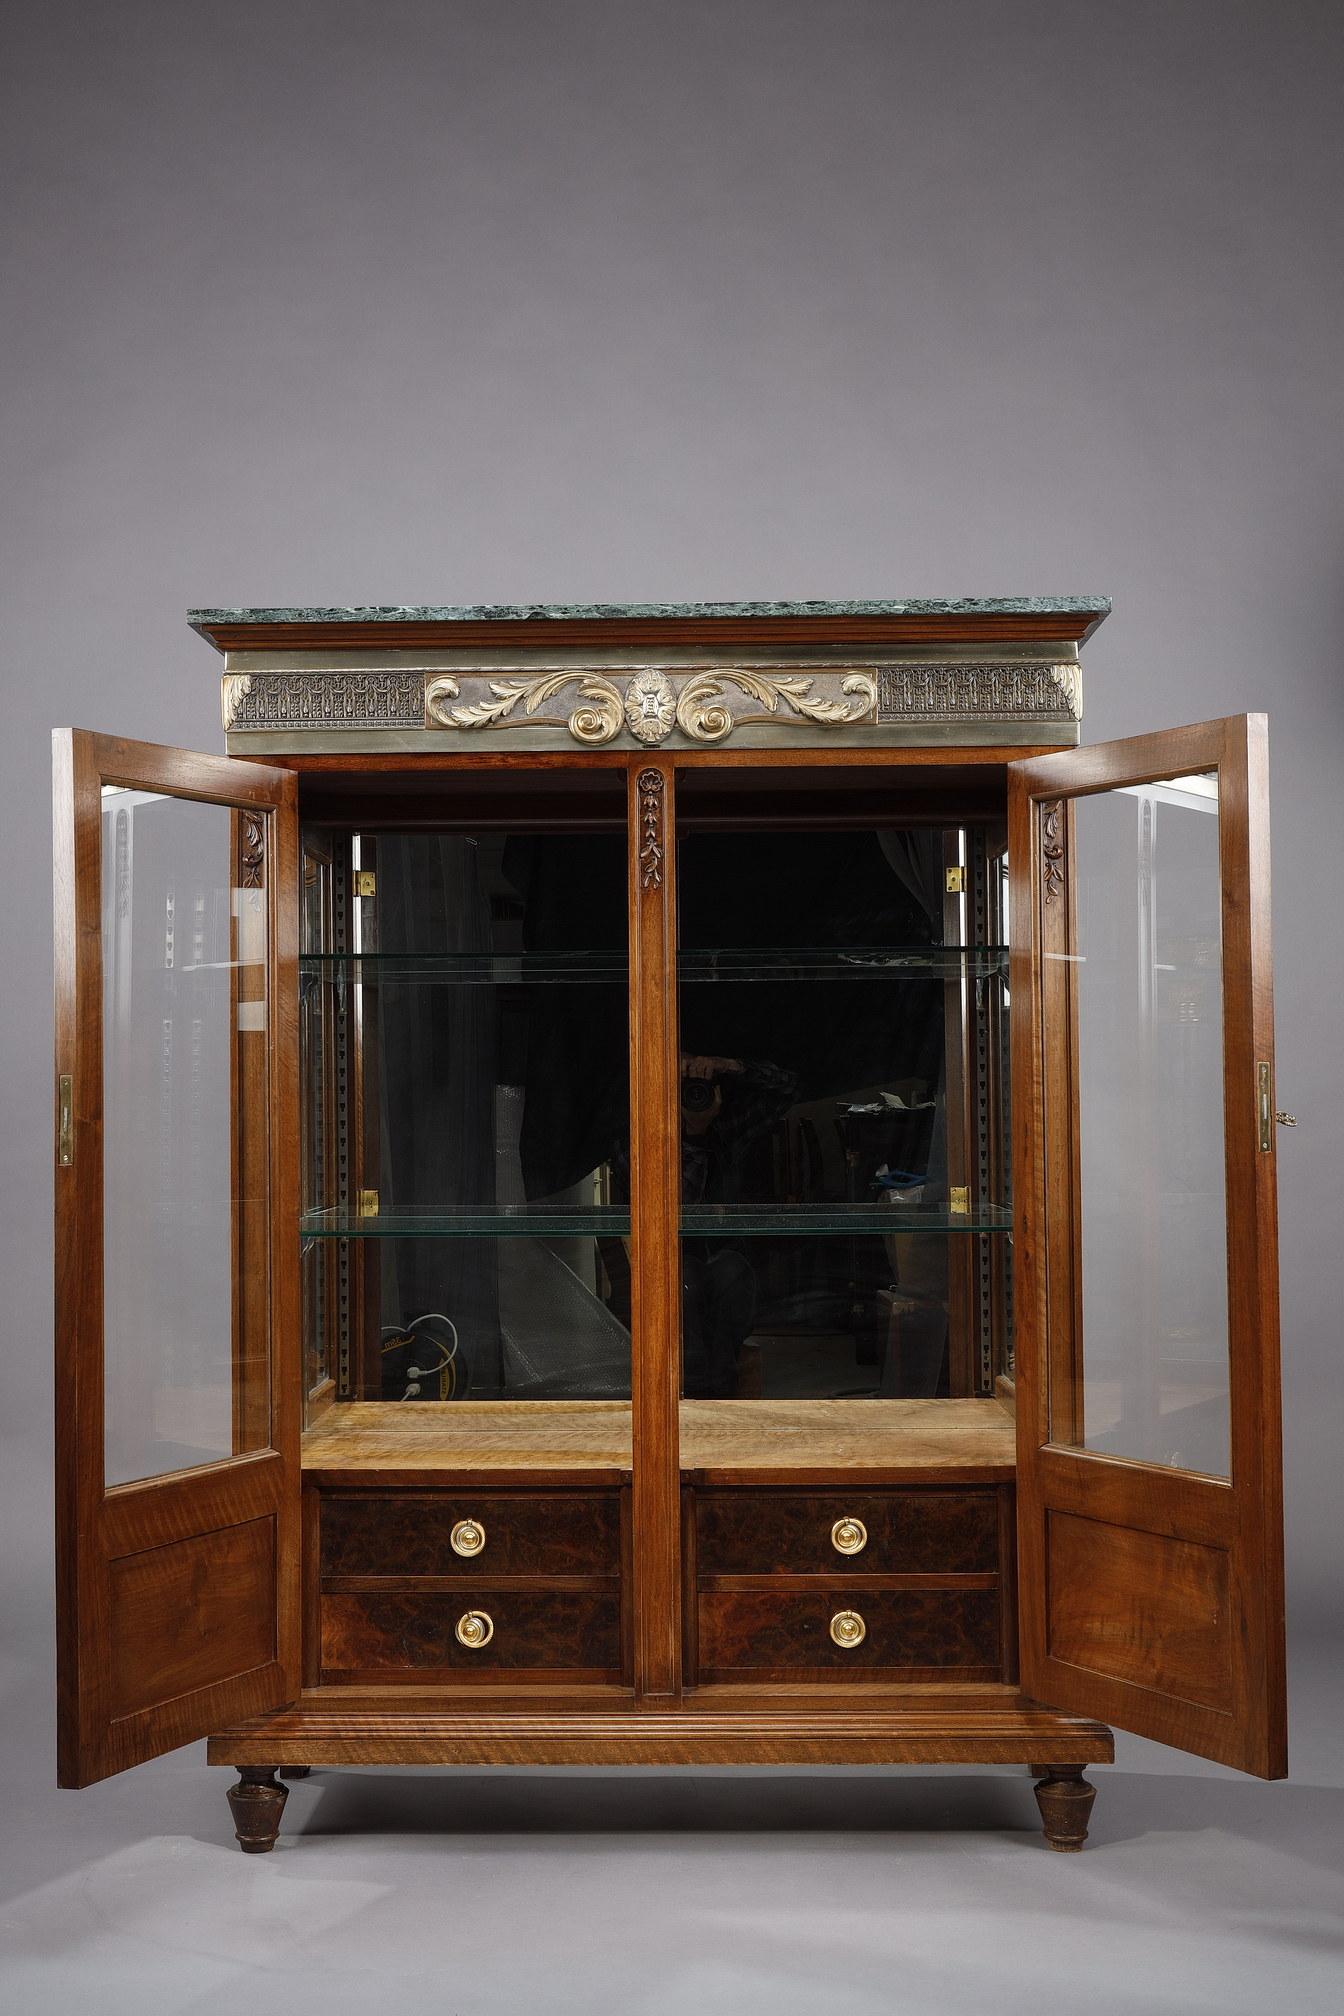 Low carved walnut display cabinet in the Louis XVI style opening with two doors on glass shelves and four drawers with double bottom including a cutlery set. The bookshelf is decorated with a large gilt bronze frieze with a front decorated with